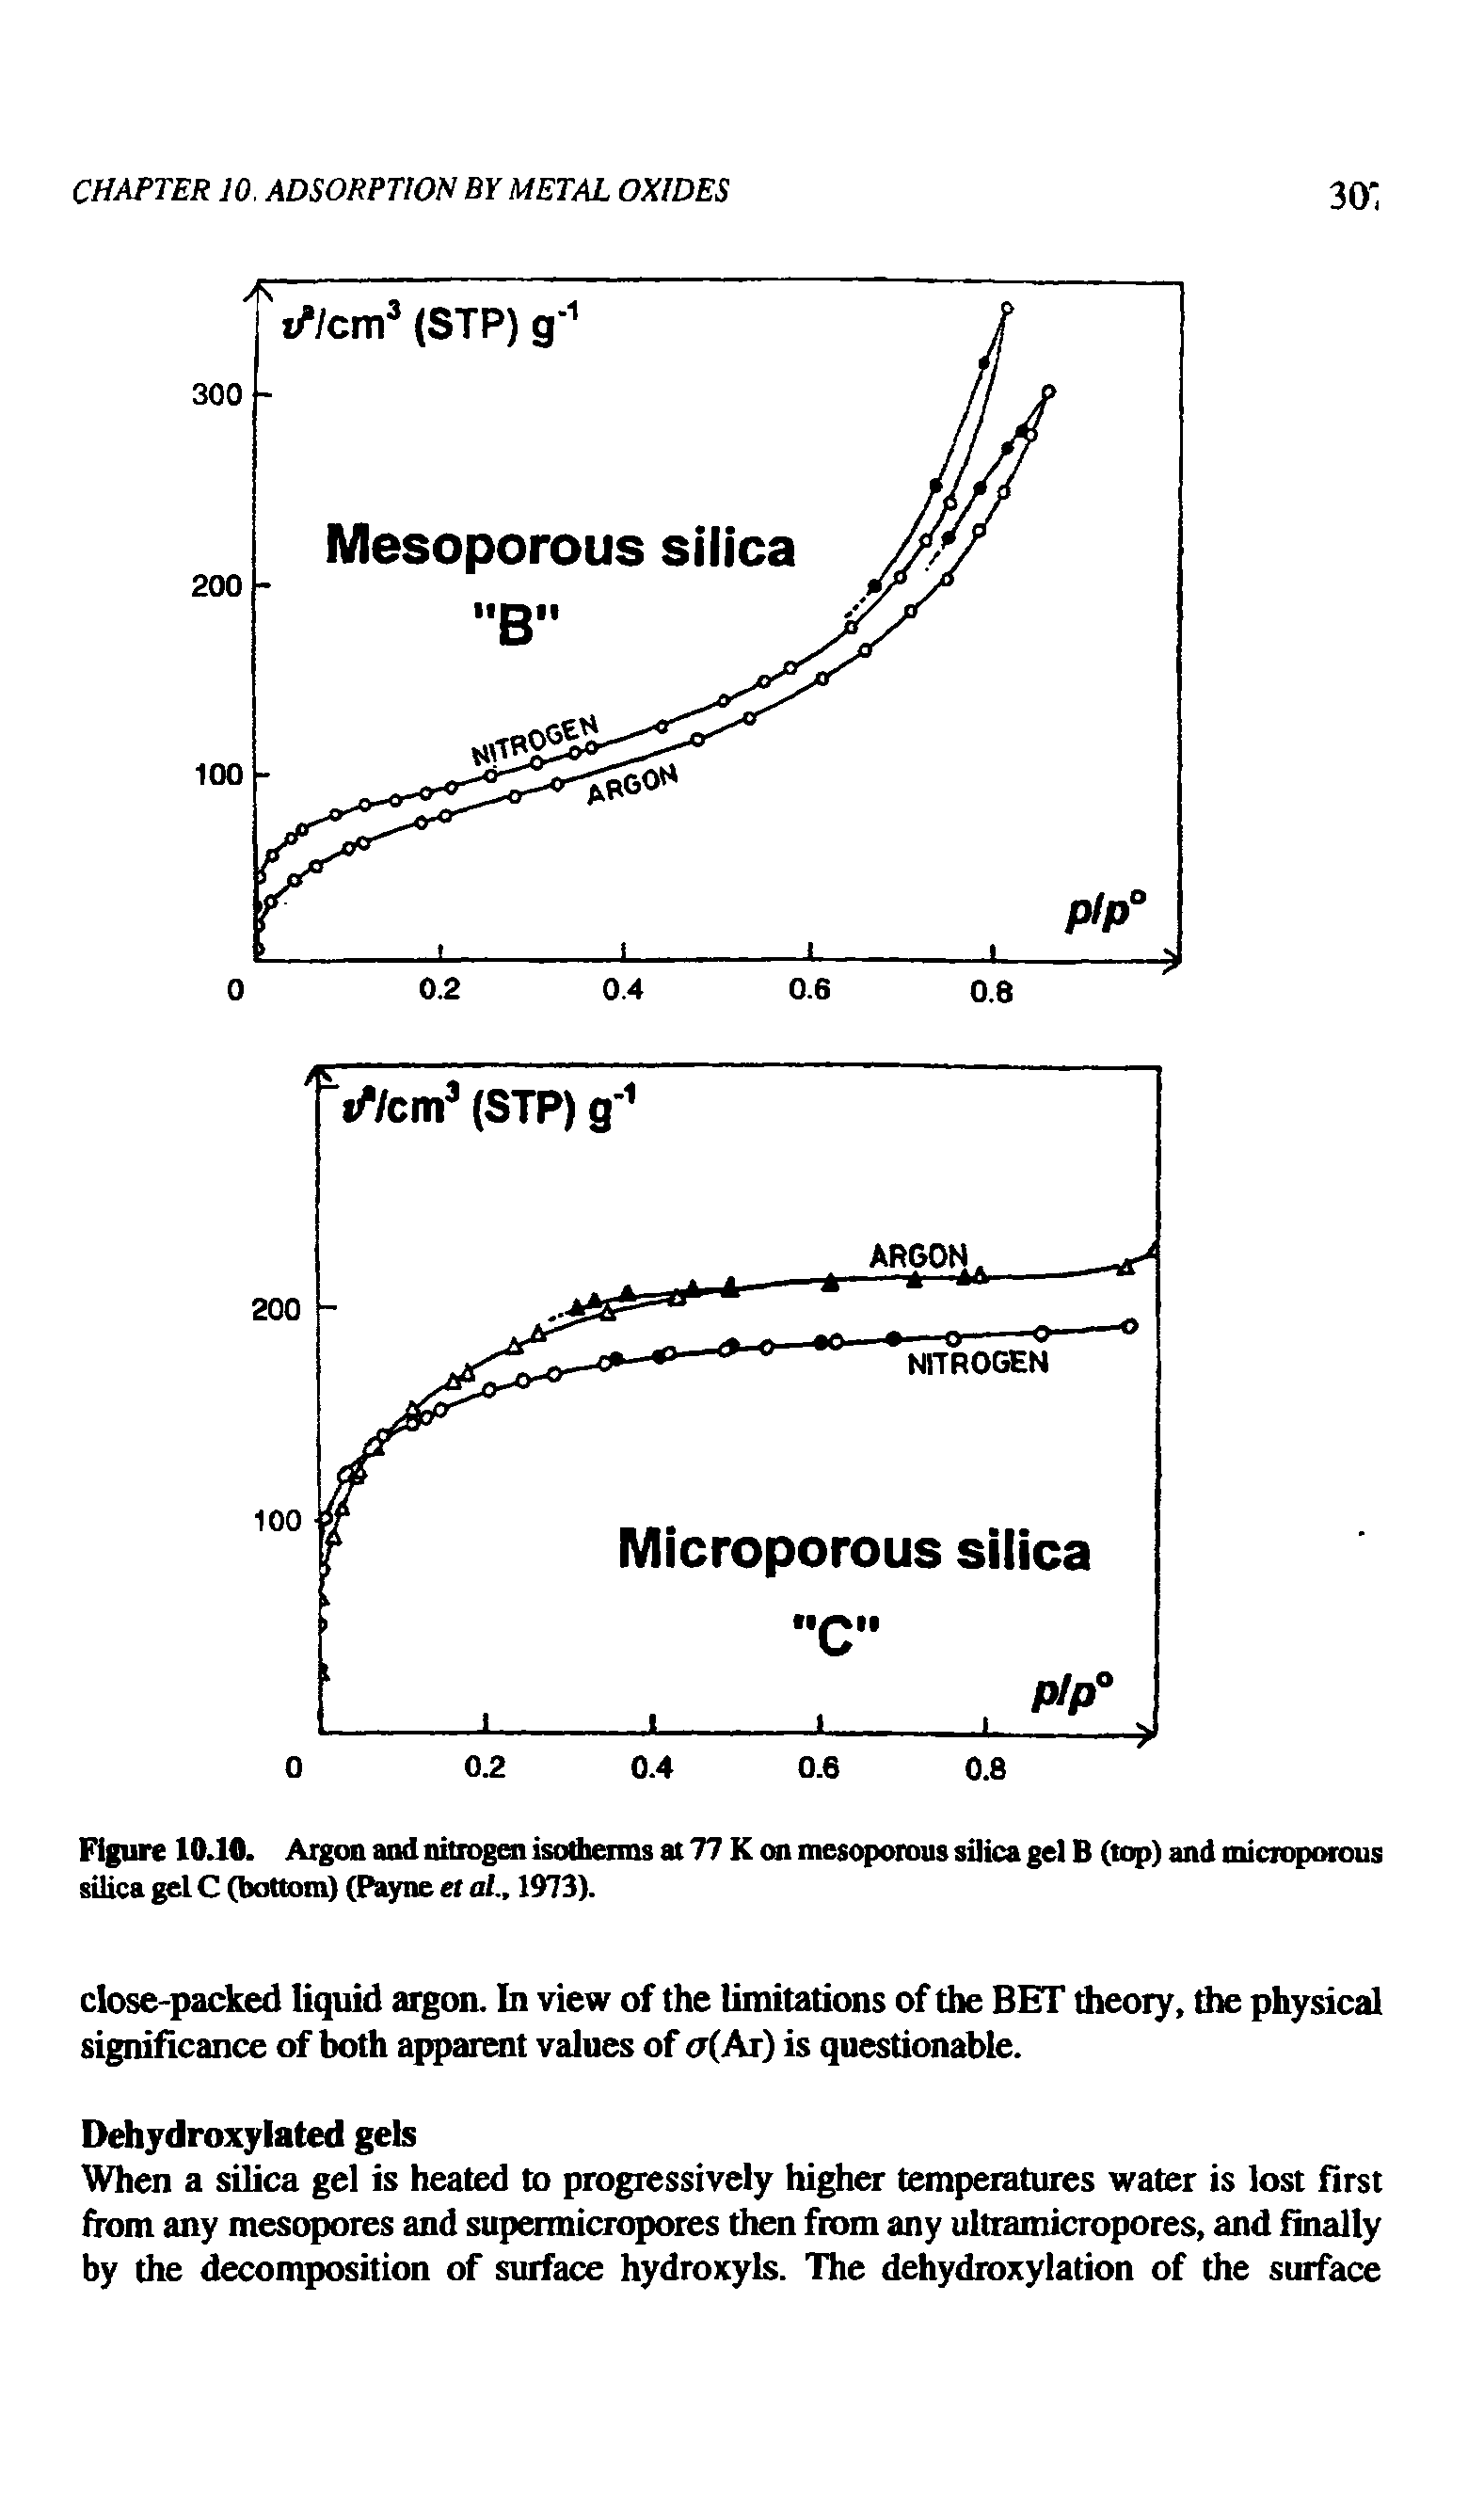 Figure 10.10. Argon and nitrogen isotherms at 77 K on mesoporous silica gel B (top) and microporous silica gel C (bottom) (Payne et al 1973).